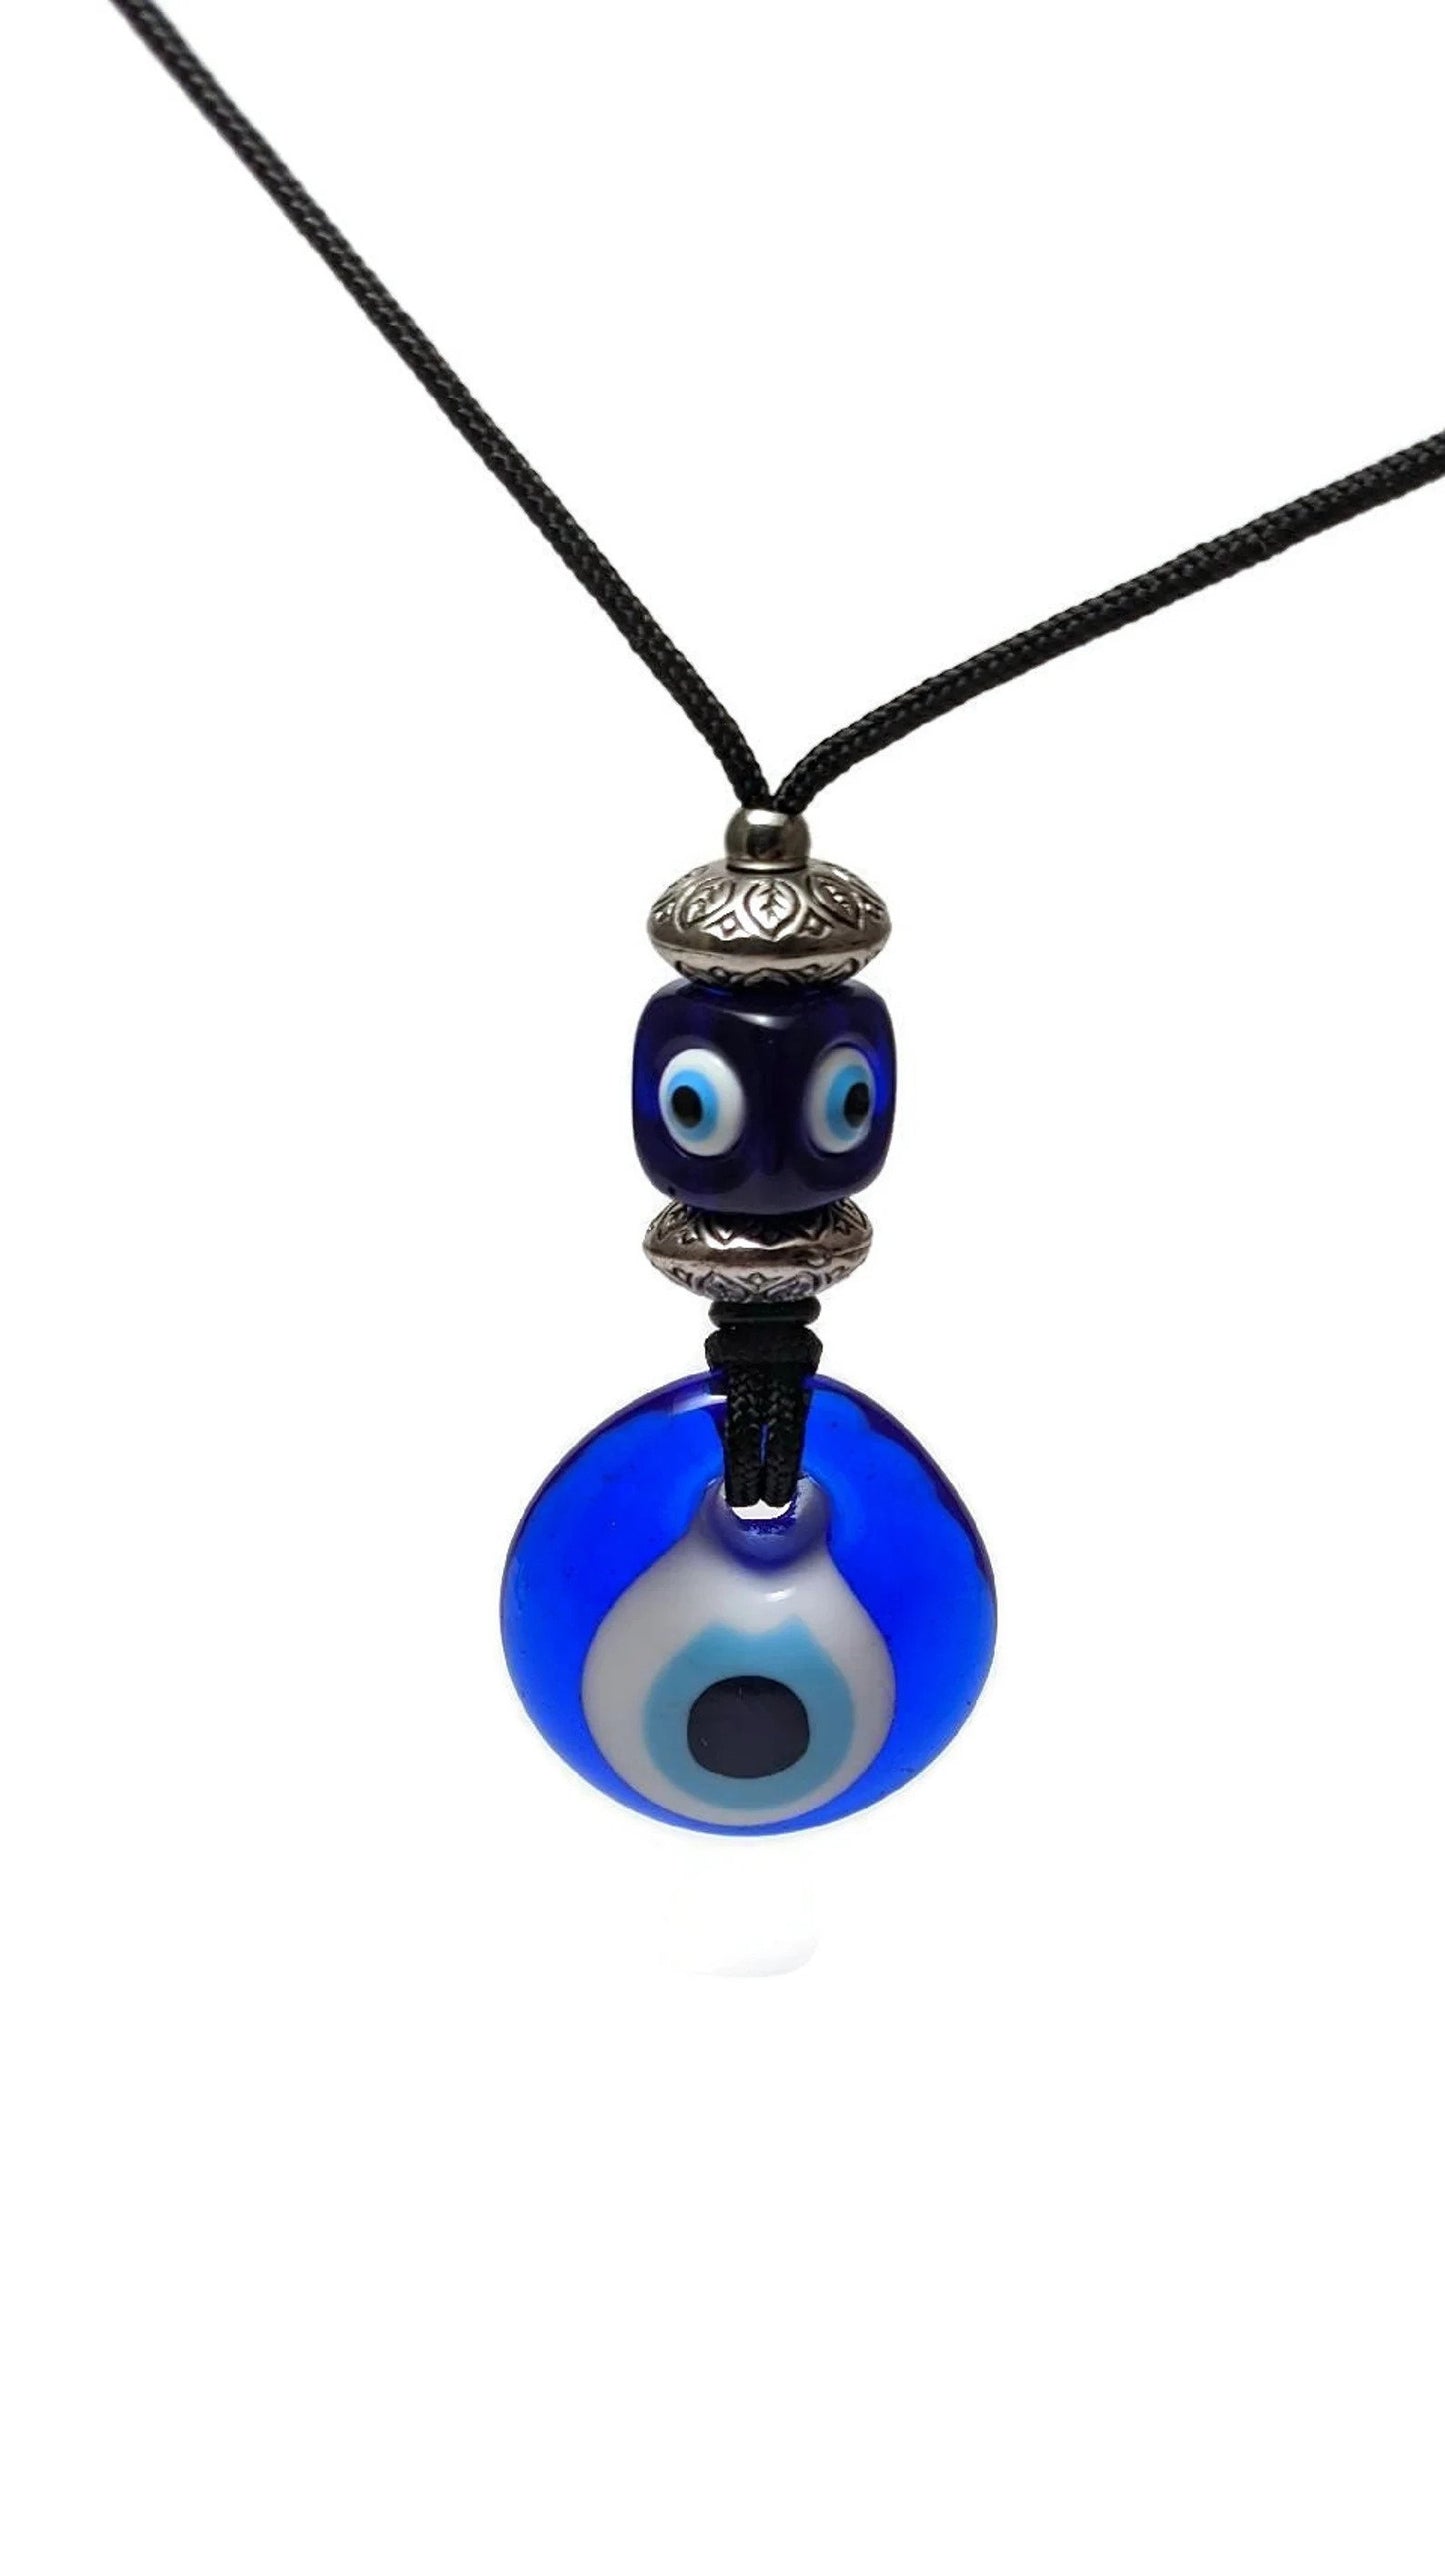 Glass Evil eye Rearview Mirror charm - new driver gift